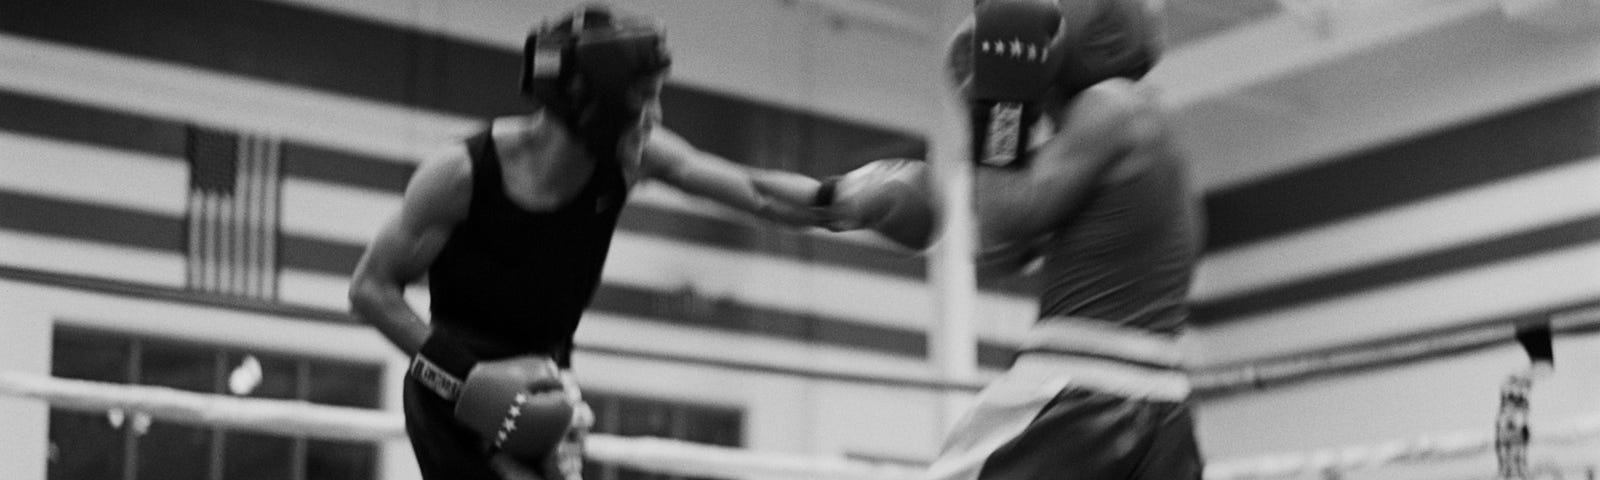 Black and white photo of two men boxing in an indoor ring